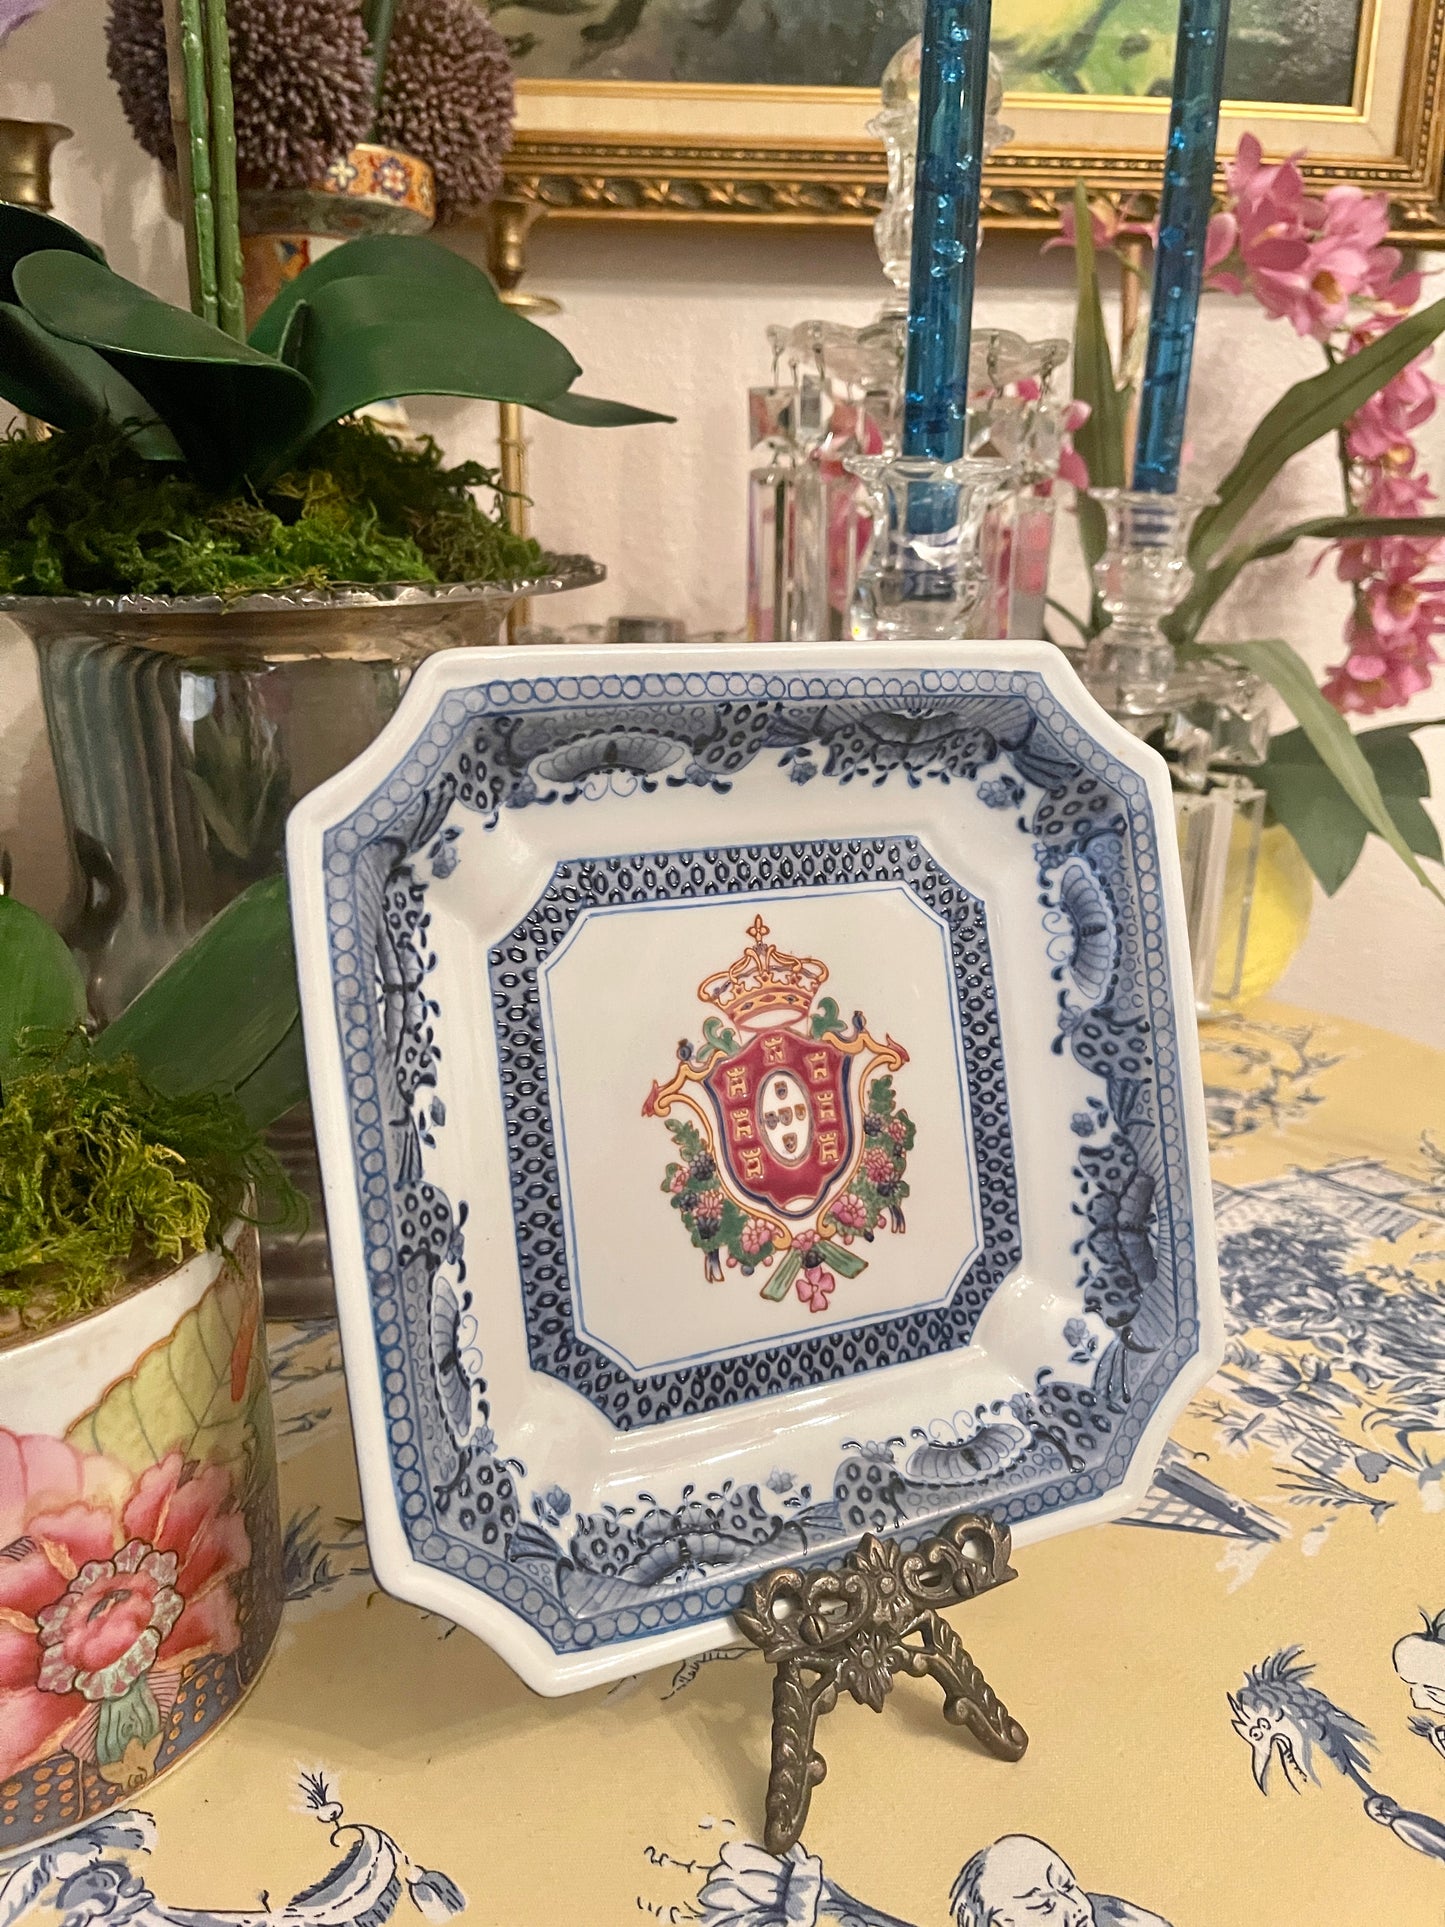 Vintage Blue and White Plate with Royal Crown Motif, Easel Included